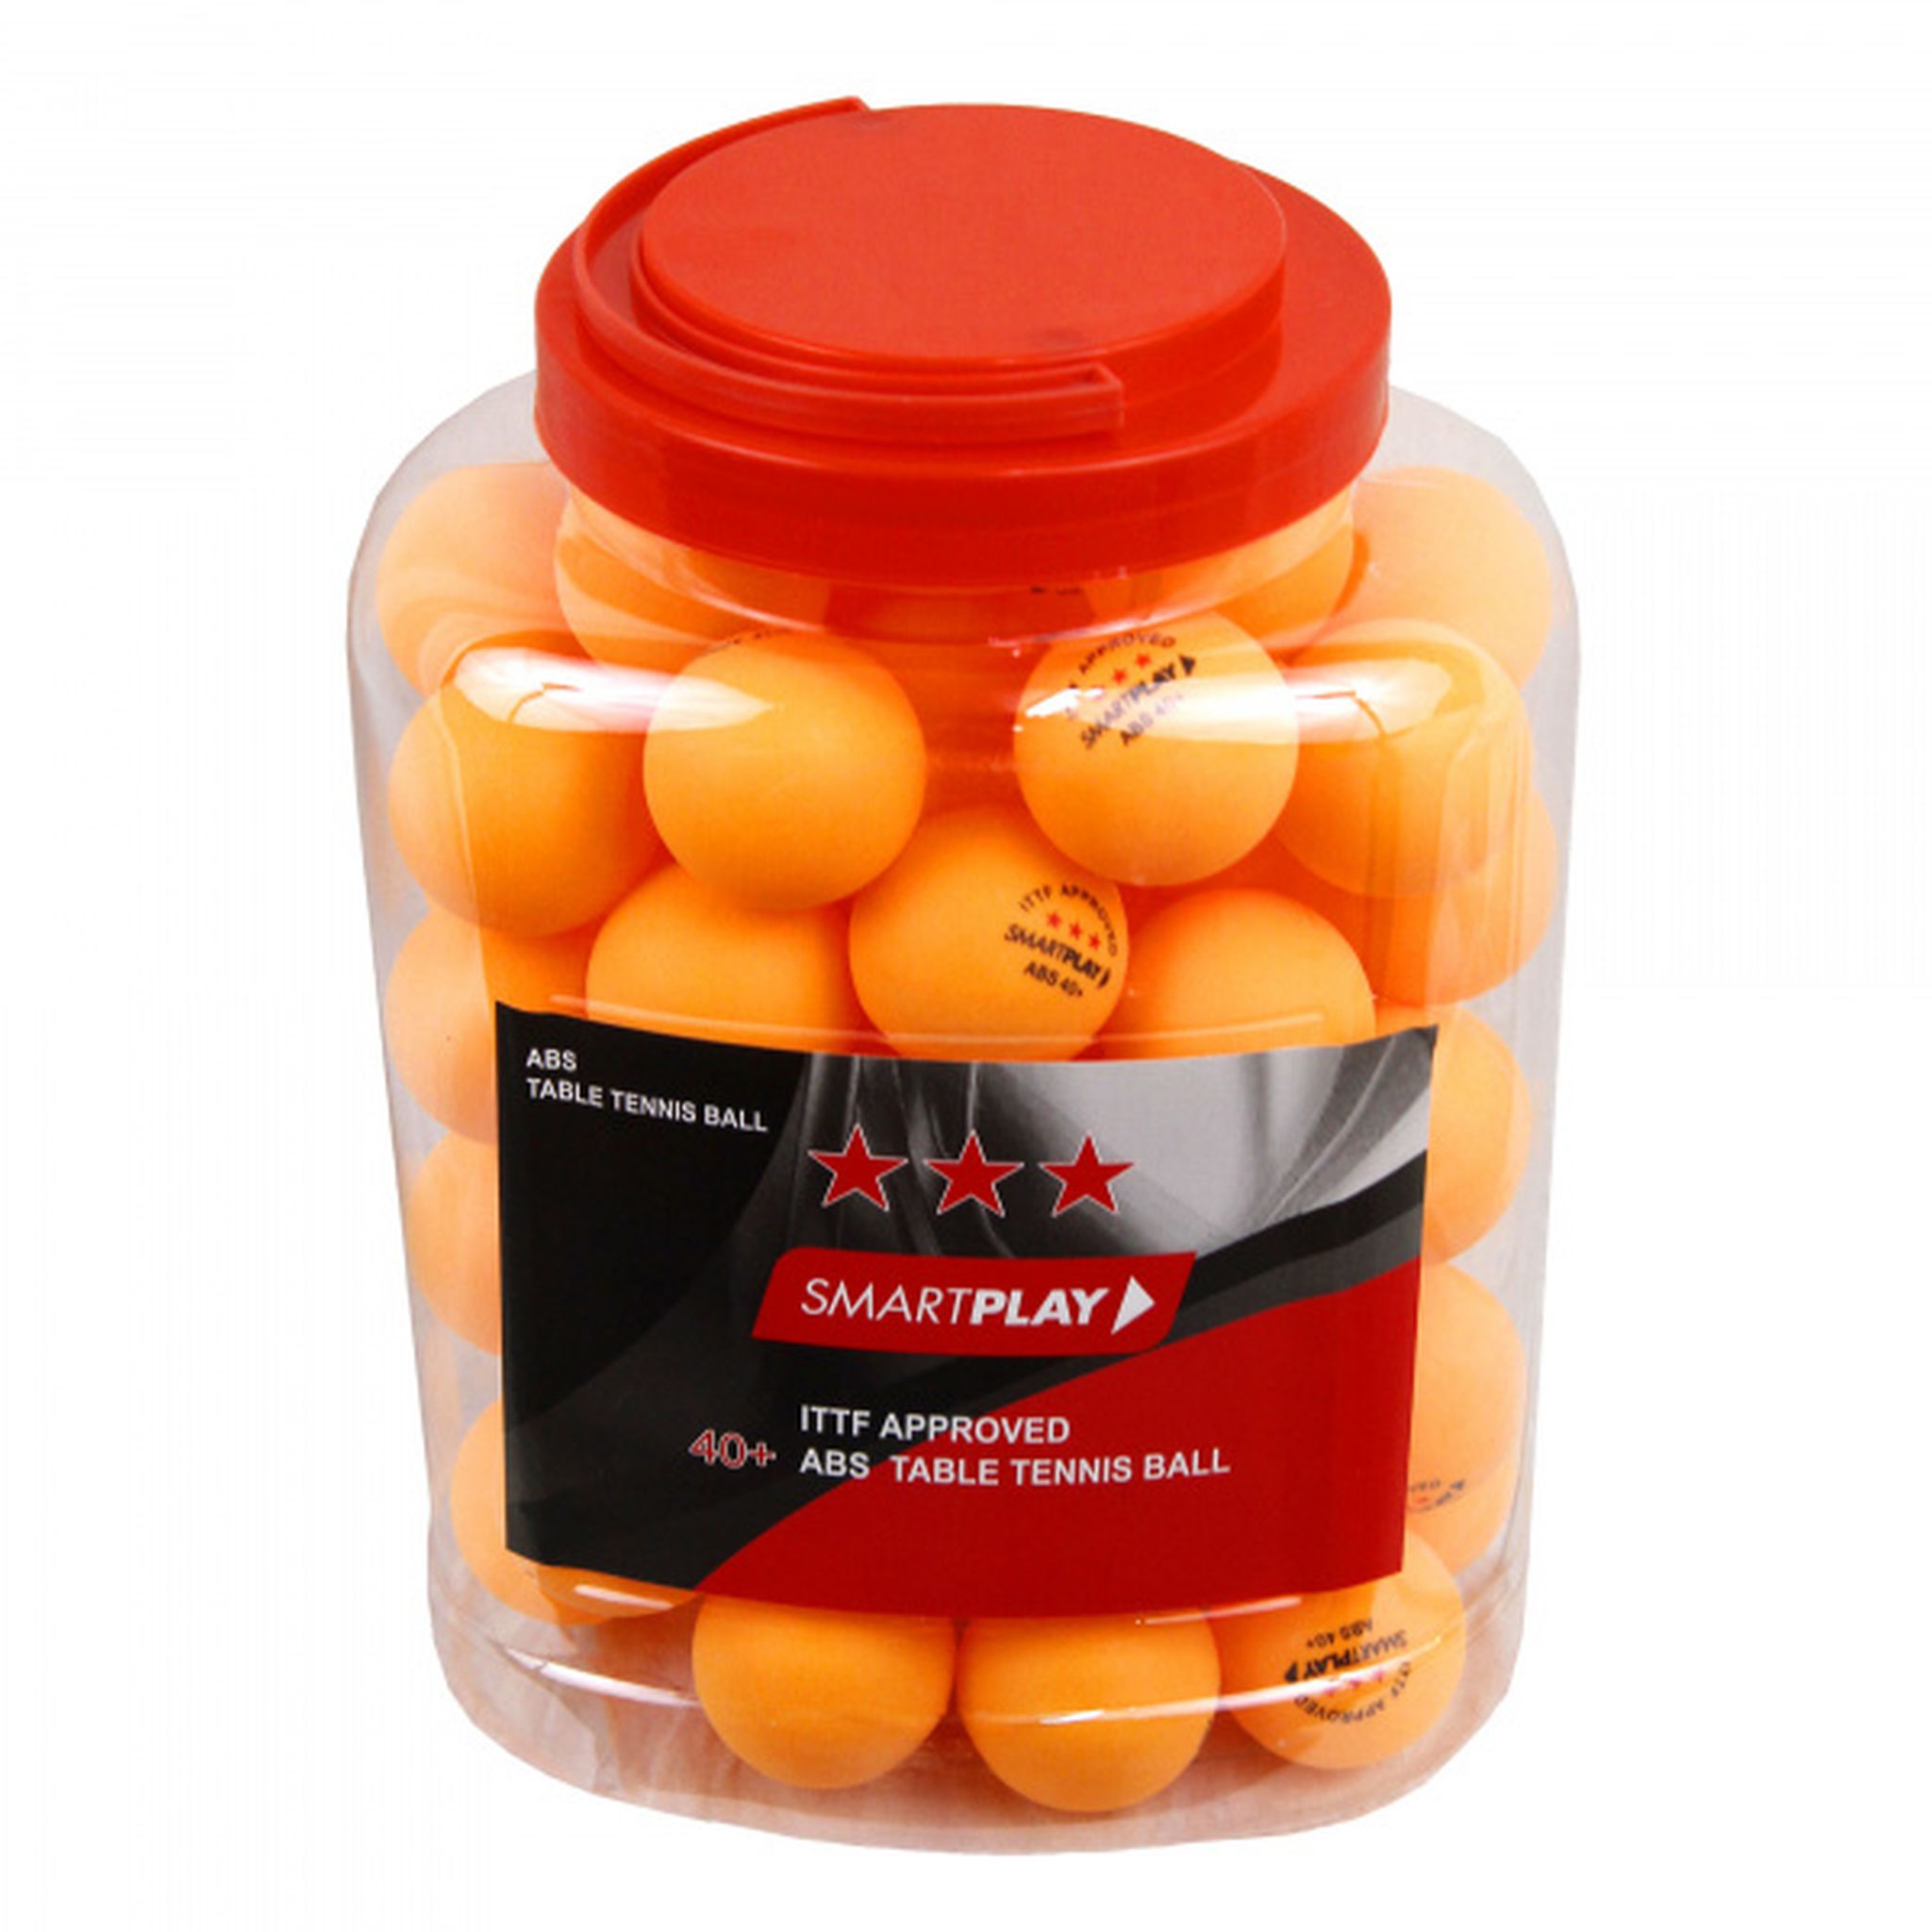 SMARTPLAY 3 Star ITTF Approved Orange Table Tennis Balls - PACK OF 60